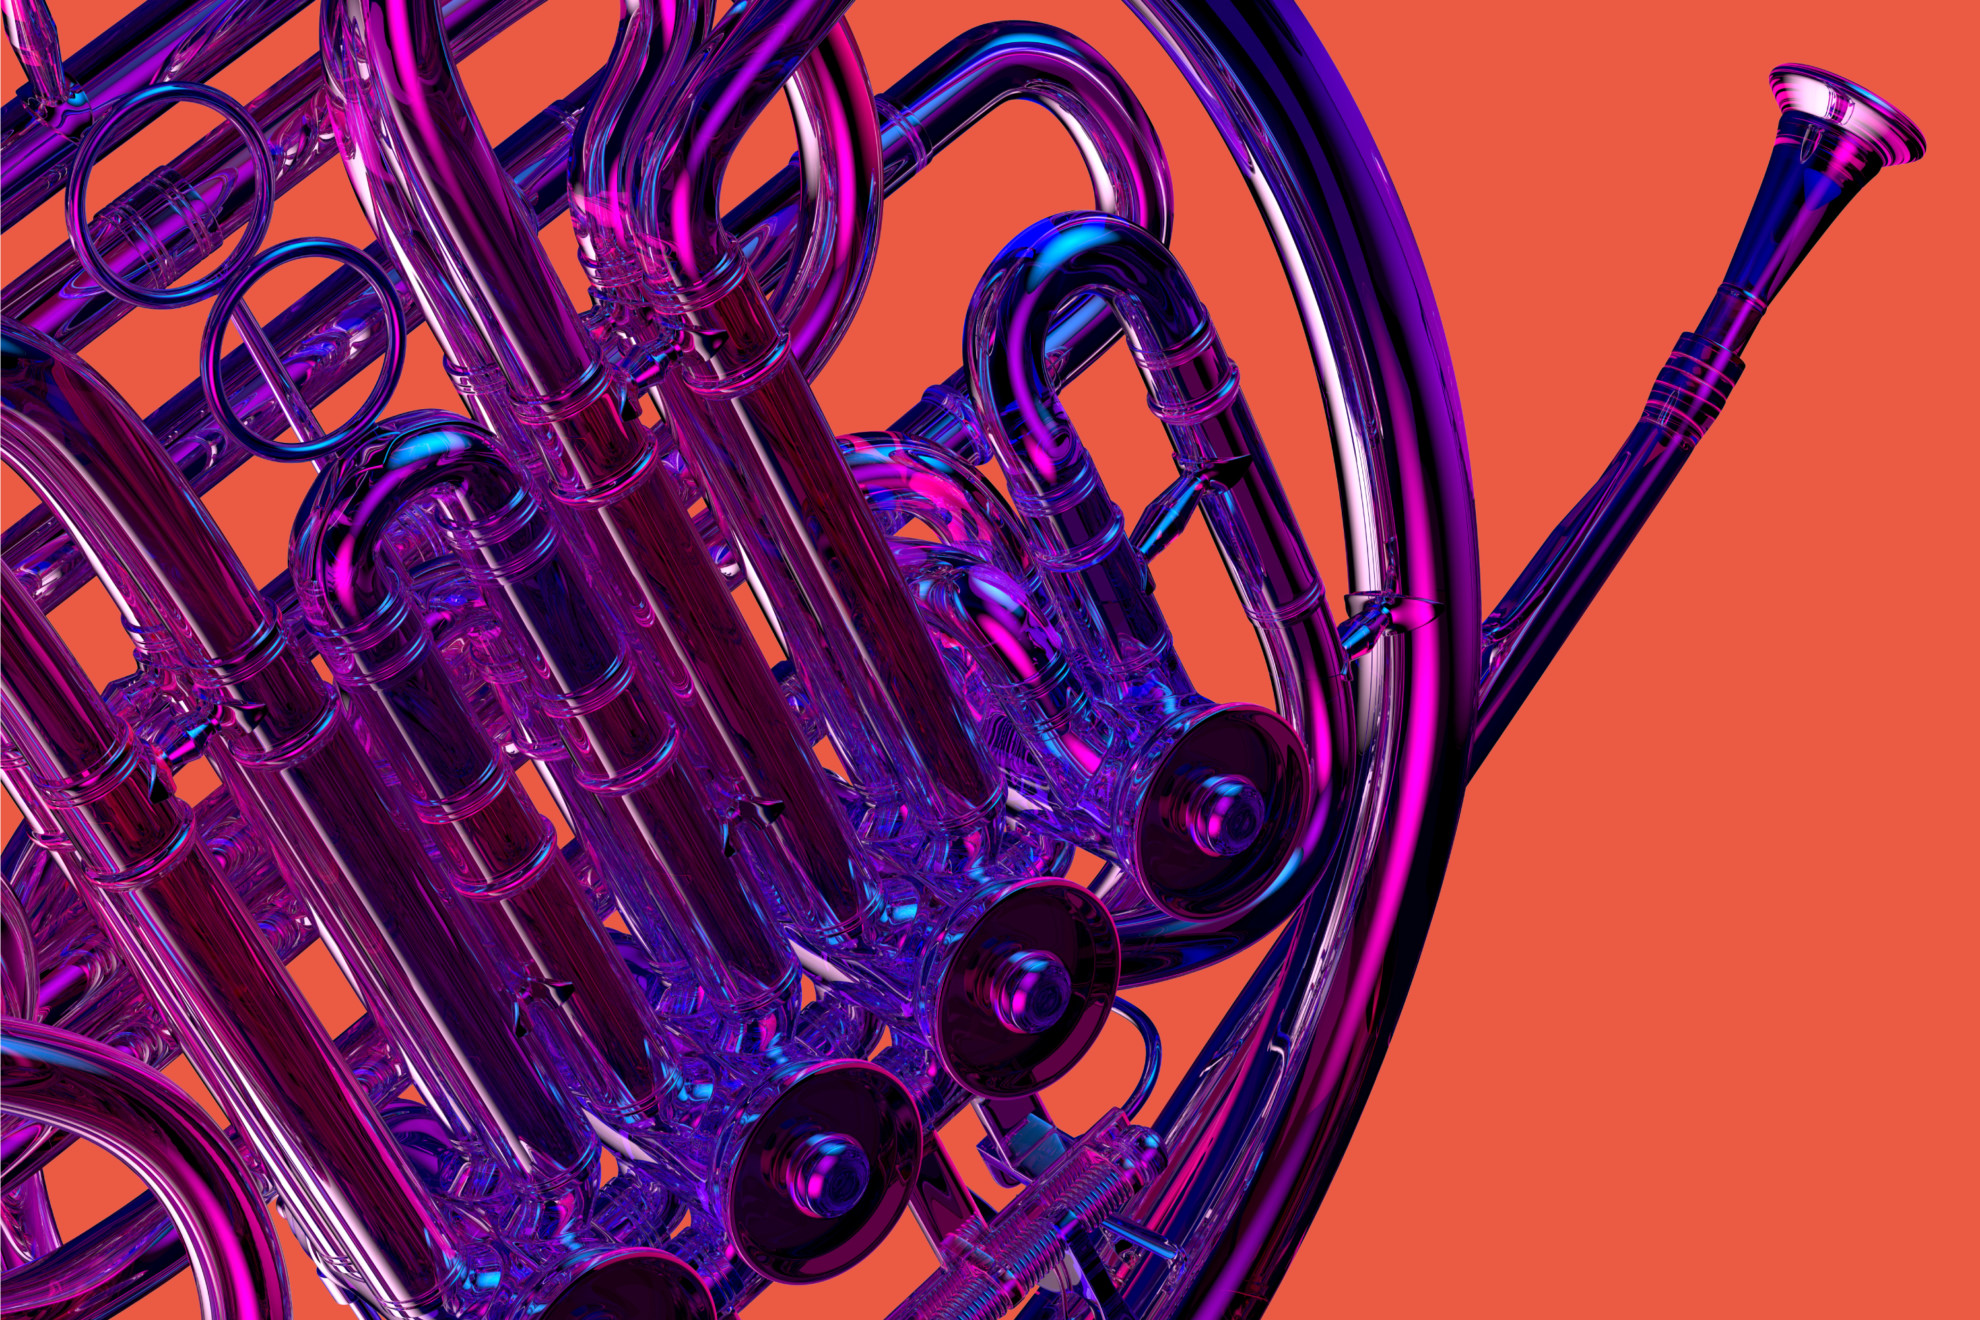 Campaign featuring 3d rendered instruments created by Studio Brave for The Australian National Academy of Music 2020 Season